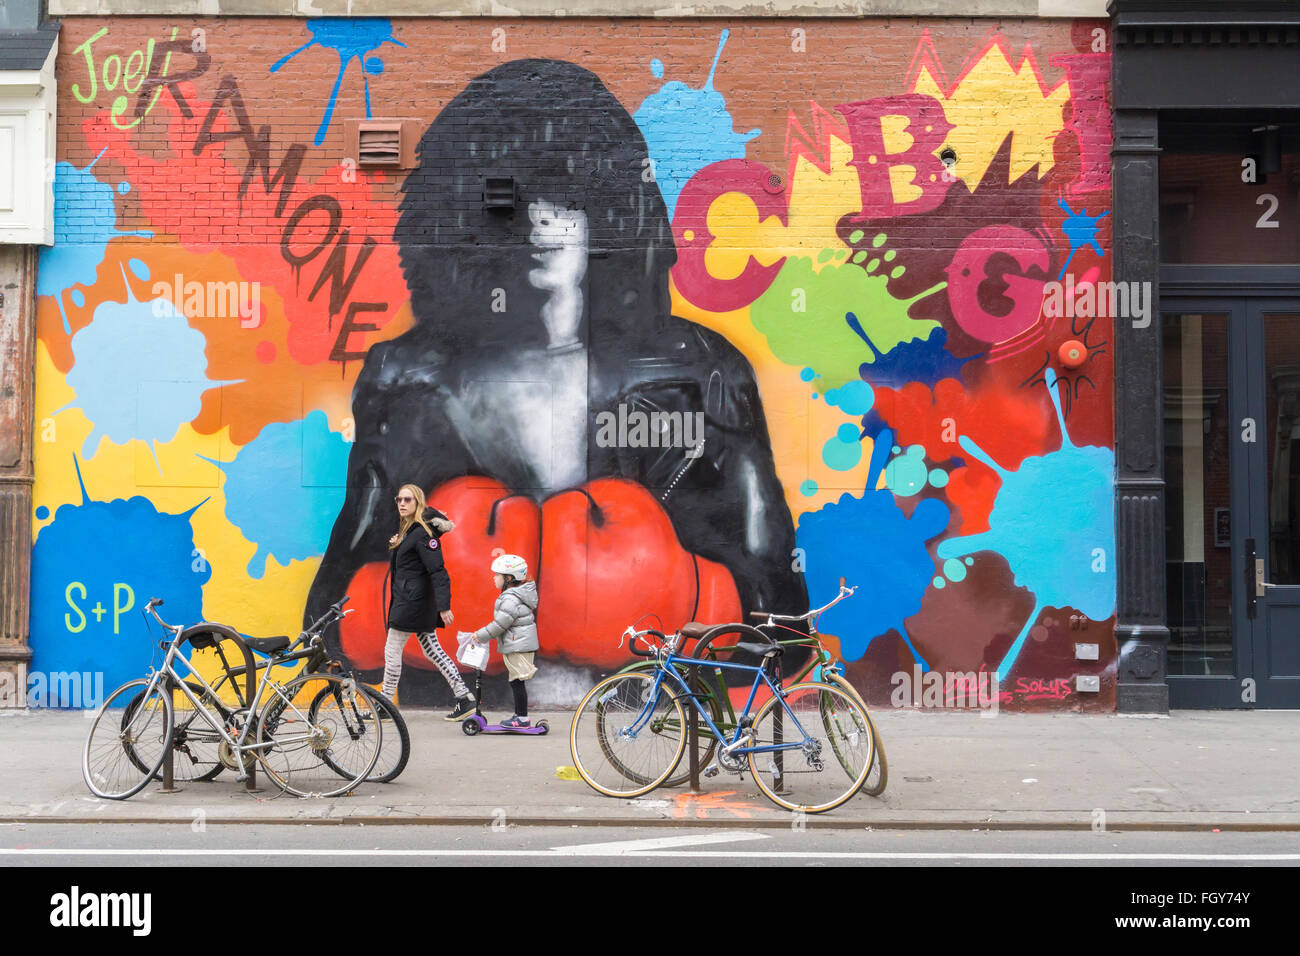 A mural by artists Solus and John (Crash) Matos off the Bowery in New York pays tribute to CBGB's and the late musician Joey Ramone, seen on Saturday, February 20, 2016. The mural commemorates the 41st anniversary of the Ramones' appearance at the iconic CBGB club and was organized by the Little Italy Street Art Project. (© Richard B. Levine) Stock Photo